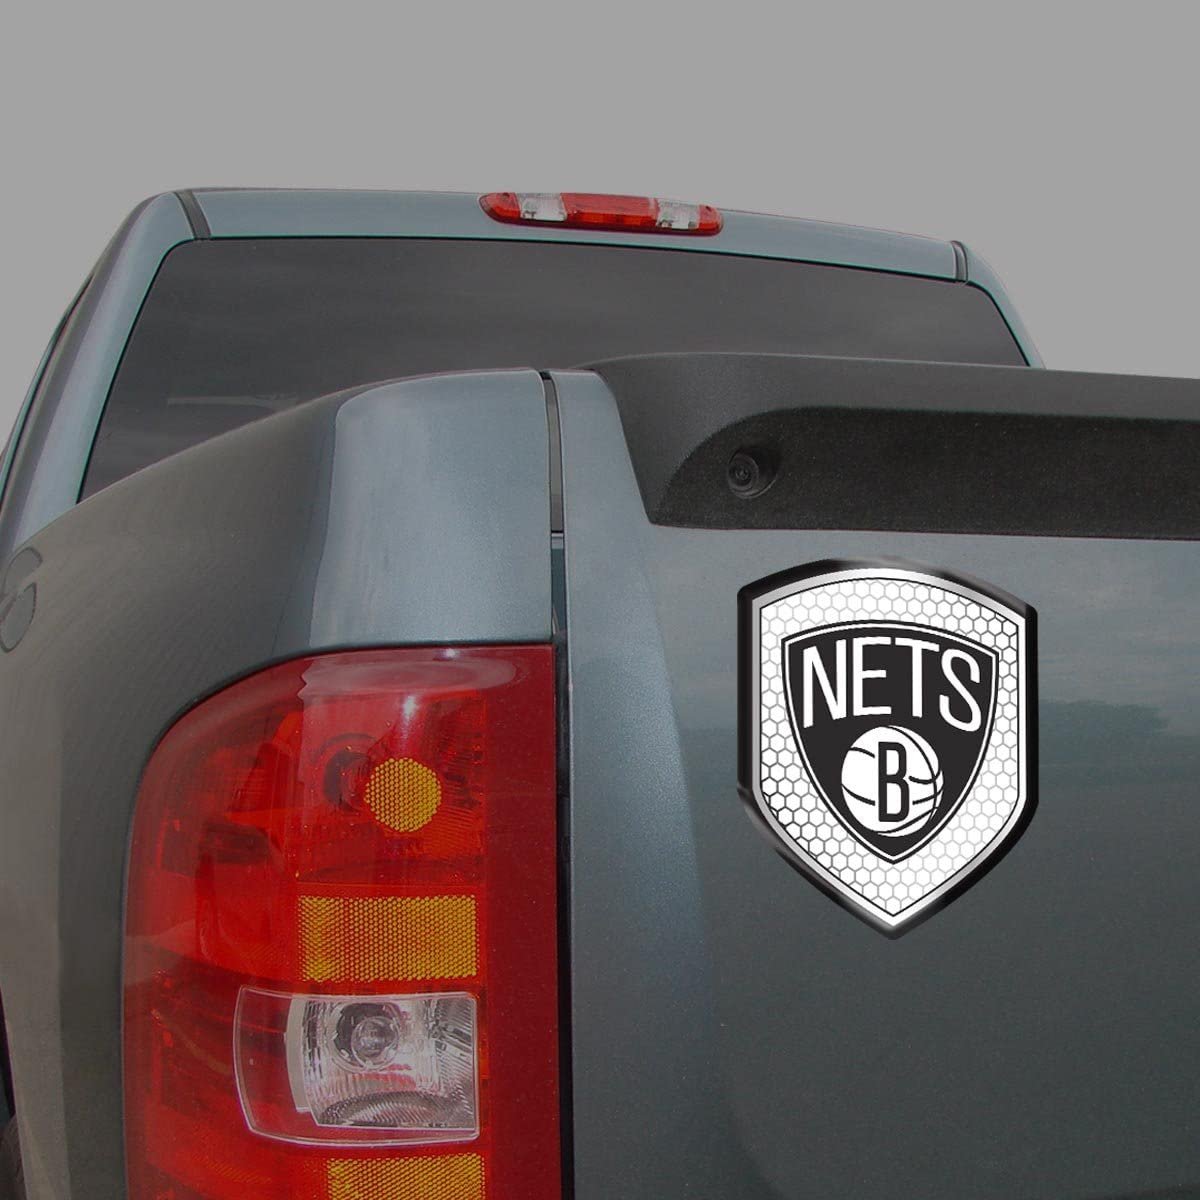 Brooklyn Nets High Intensity Reflector, Shield Shape, Raised Decal Sticker, 2.5x3.5 Inch, Home or Auto, Full Adhesive Backing